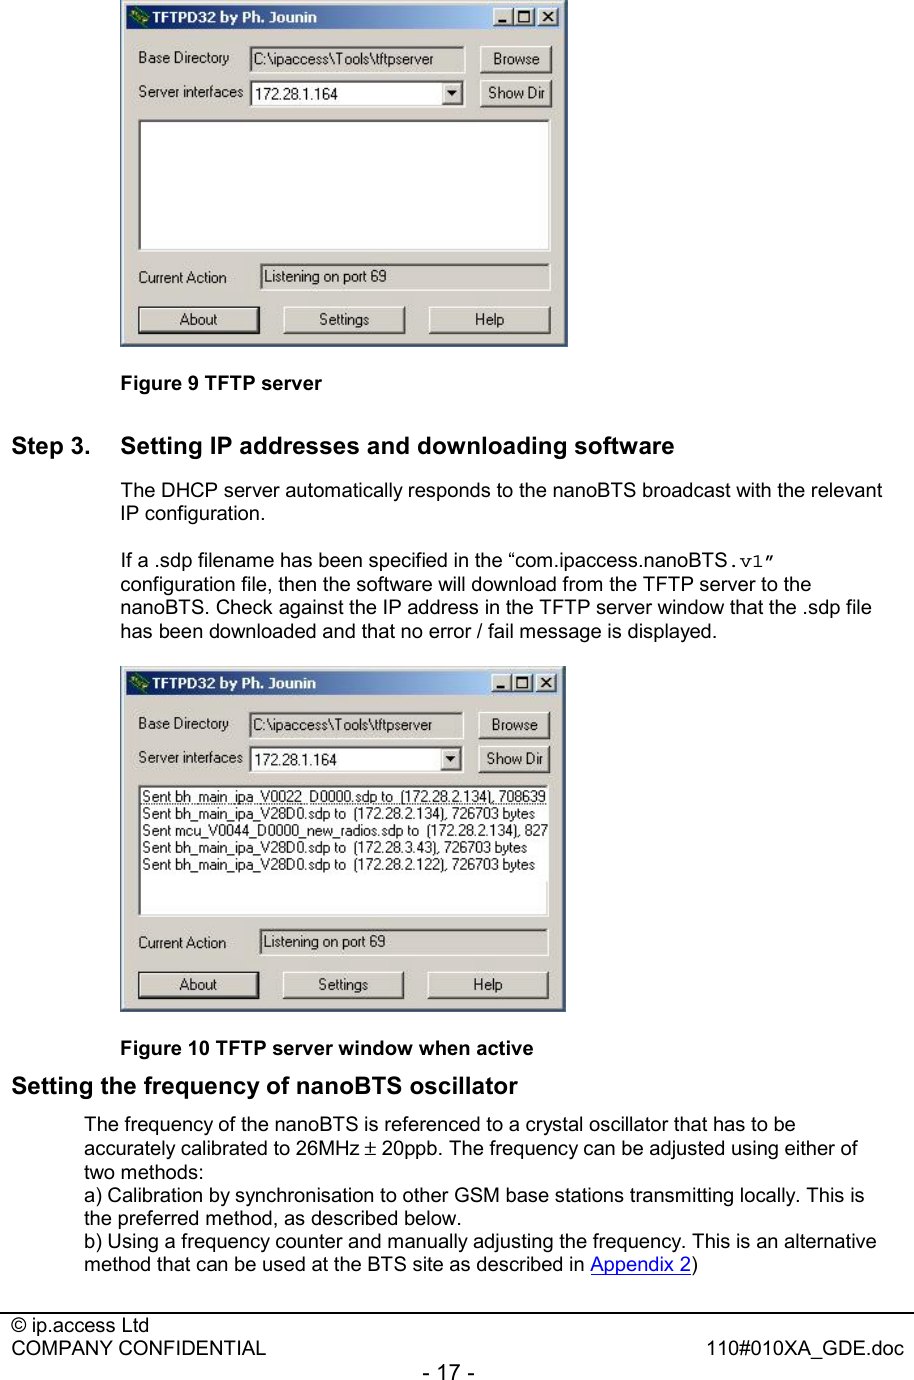  © ip.access Ltd   COMPANY CONFIDENTIAL  110#010XA_GDE.doc - 17 -   Figure 9 TFTP server Step 3.  Setting IP addresses and downloading software   The DHCP server automatically responds to the nanoBTS broadcast with the relevant IP configuration.   If a .sdp filename has been specified in the “com.ipaccess.nanoBTS.v1” configuration file, then the software will download from the TFTP server to the nanoBTS. Check against the IP address in the TFTP server window that the .sdp file has been downloaded and that no error / fail message is displayed.   Figure 10 TFTP server window when active Setting the frequency of nanoBTS oscillator The frequency of the nanoBTS is referenced to a crystal oscillator that has to be accurately calibrated to 26MHz ± 20ppb. The frequency can be adjusted using either of two methods: a) Calibration by synchronisation to other GSM base stations transmitting locally. This is the preferred method, as described below. b) Using a frequency counter and manually adjusting the frequency. This is an alternative method that can be used at the BTS site as described in Appendix 2) 